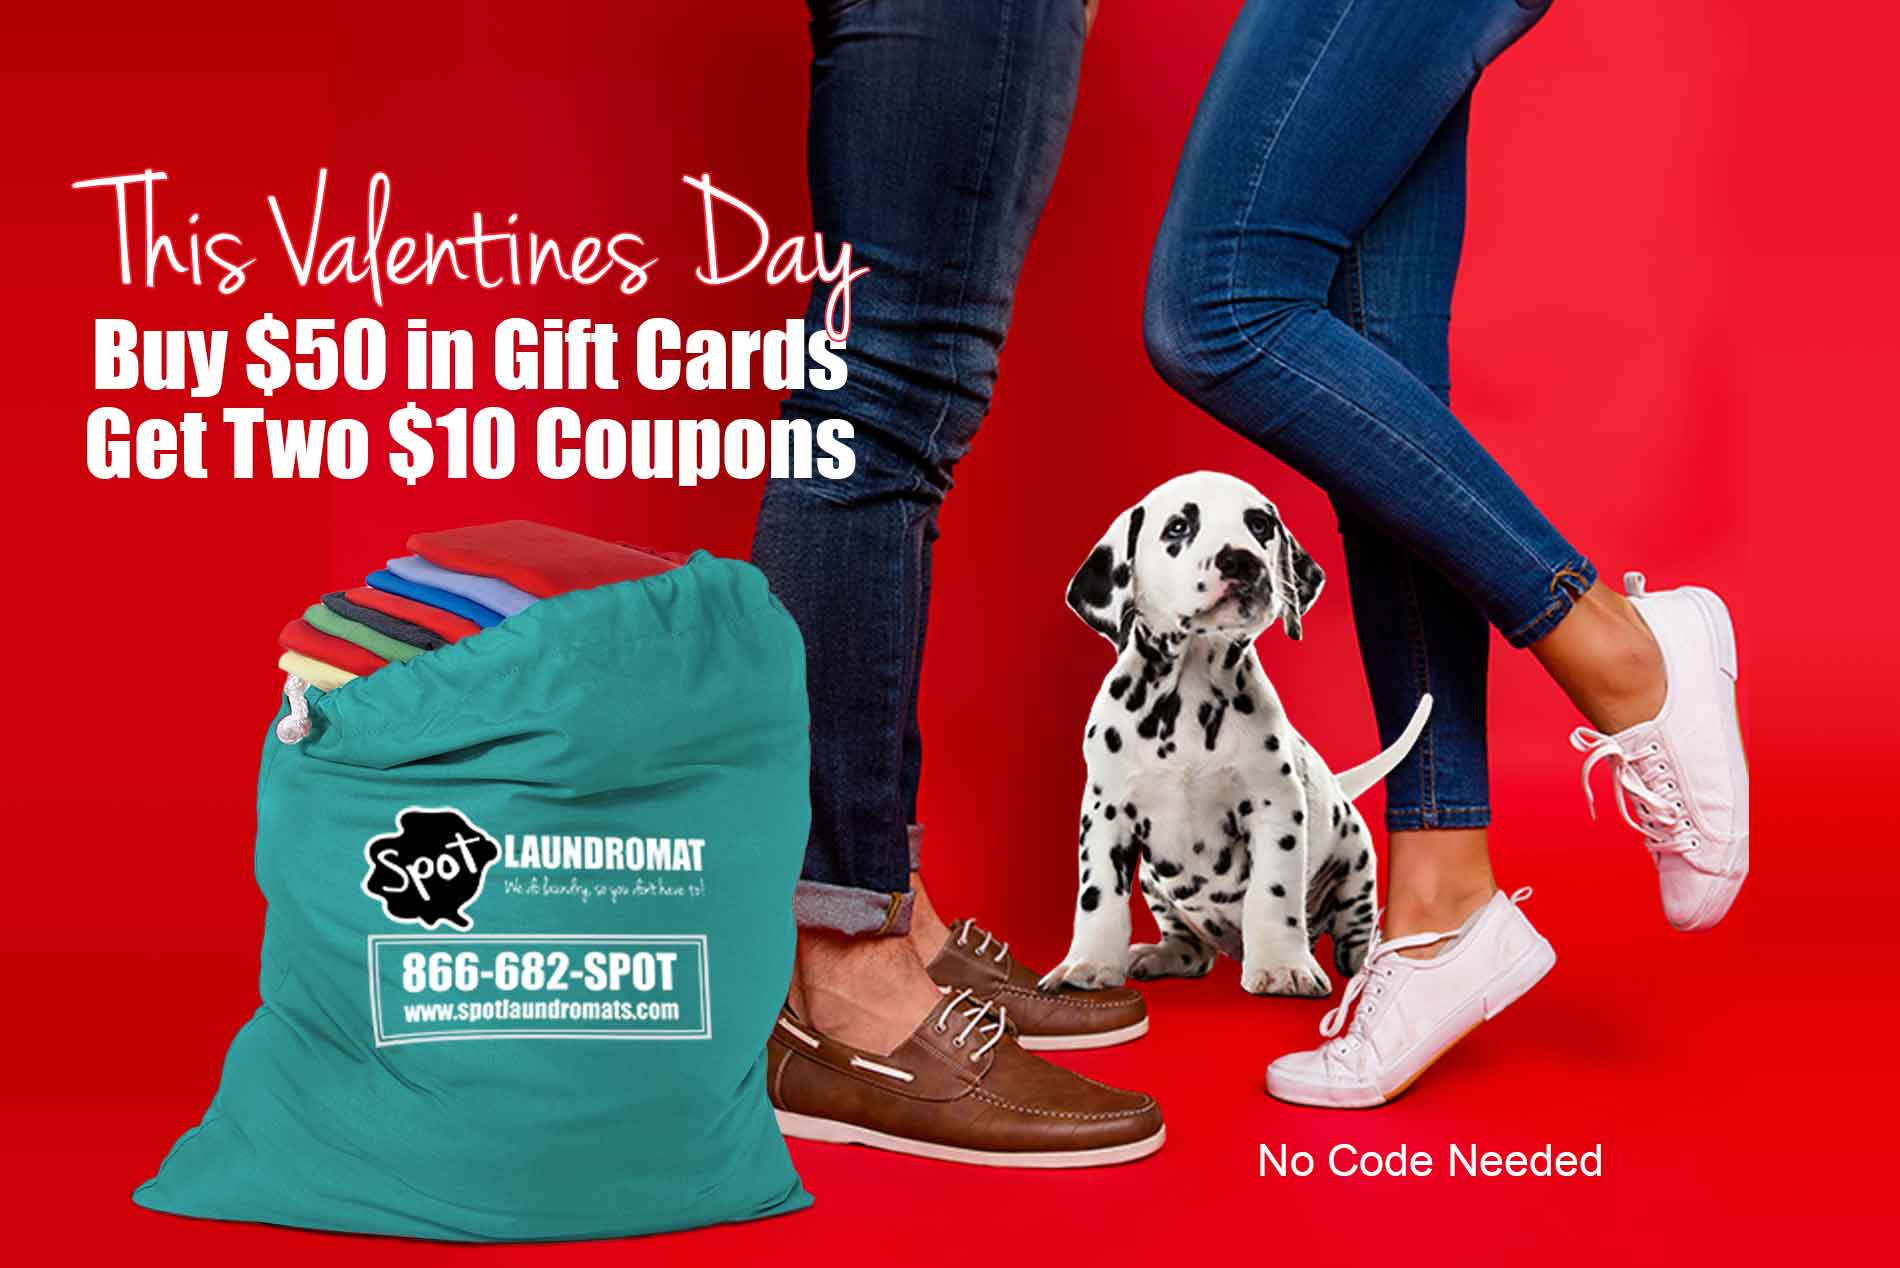 Buy $50 in Gift Cards, Get Two $10 Coupons. With Our Valentines Day Deal.